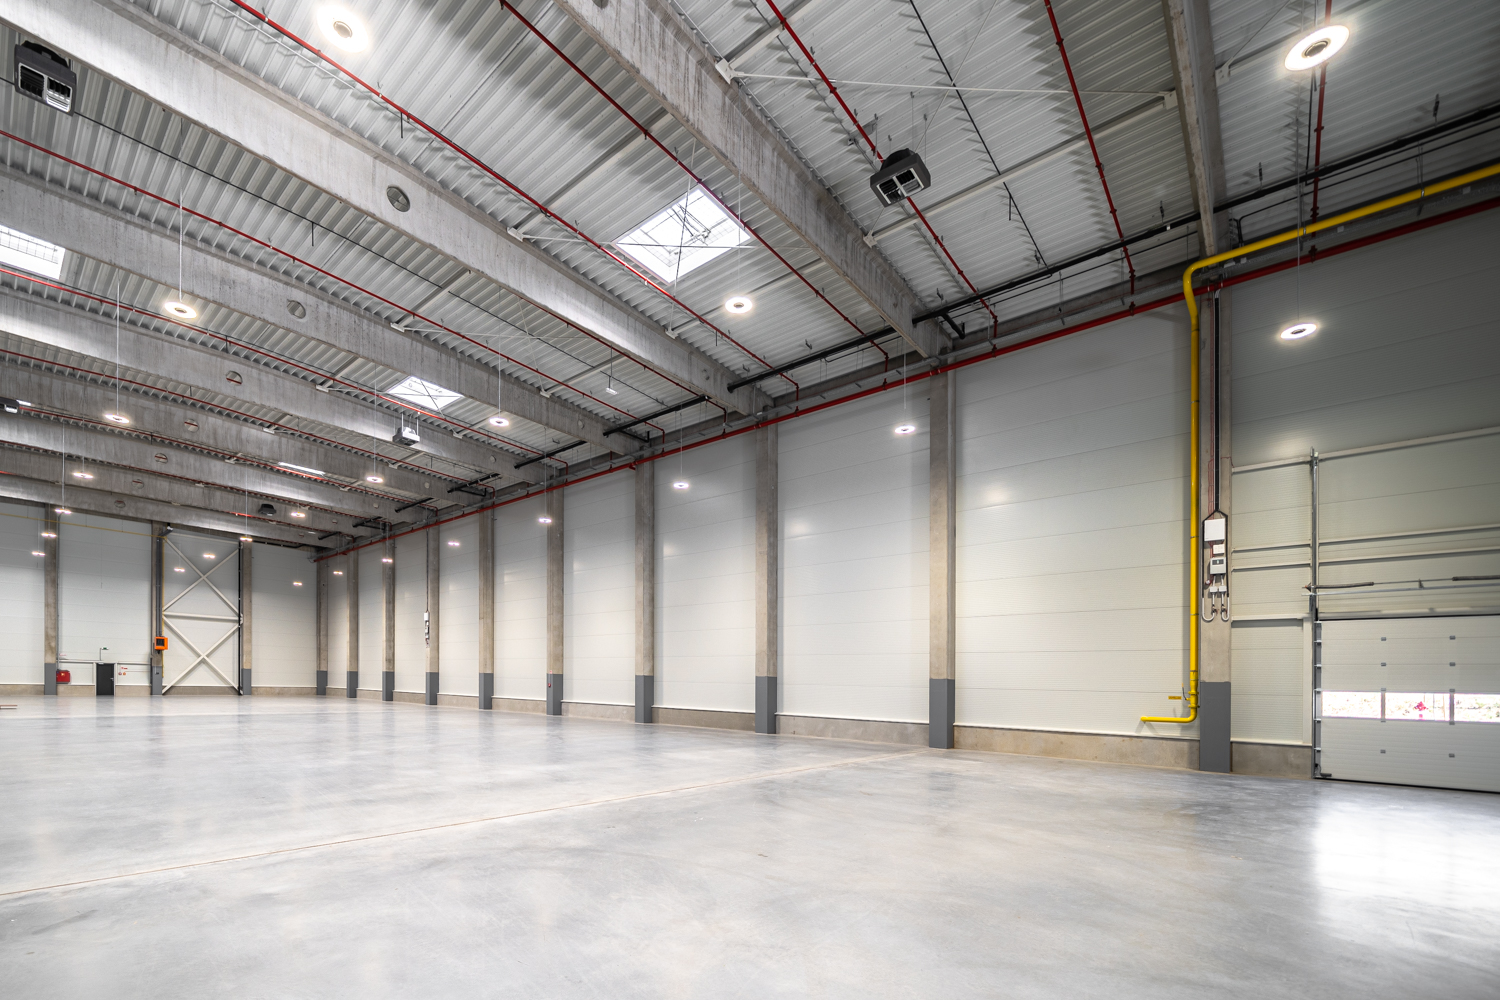 WING has handed over two new industrial halls: Phase 1 of the East Gate Pro Business Park has been completed